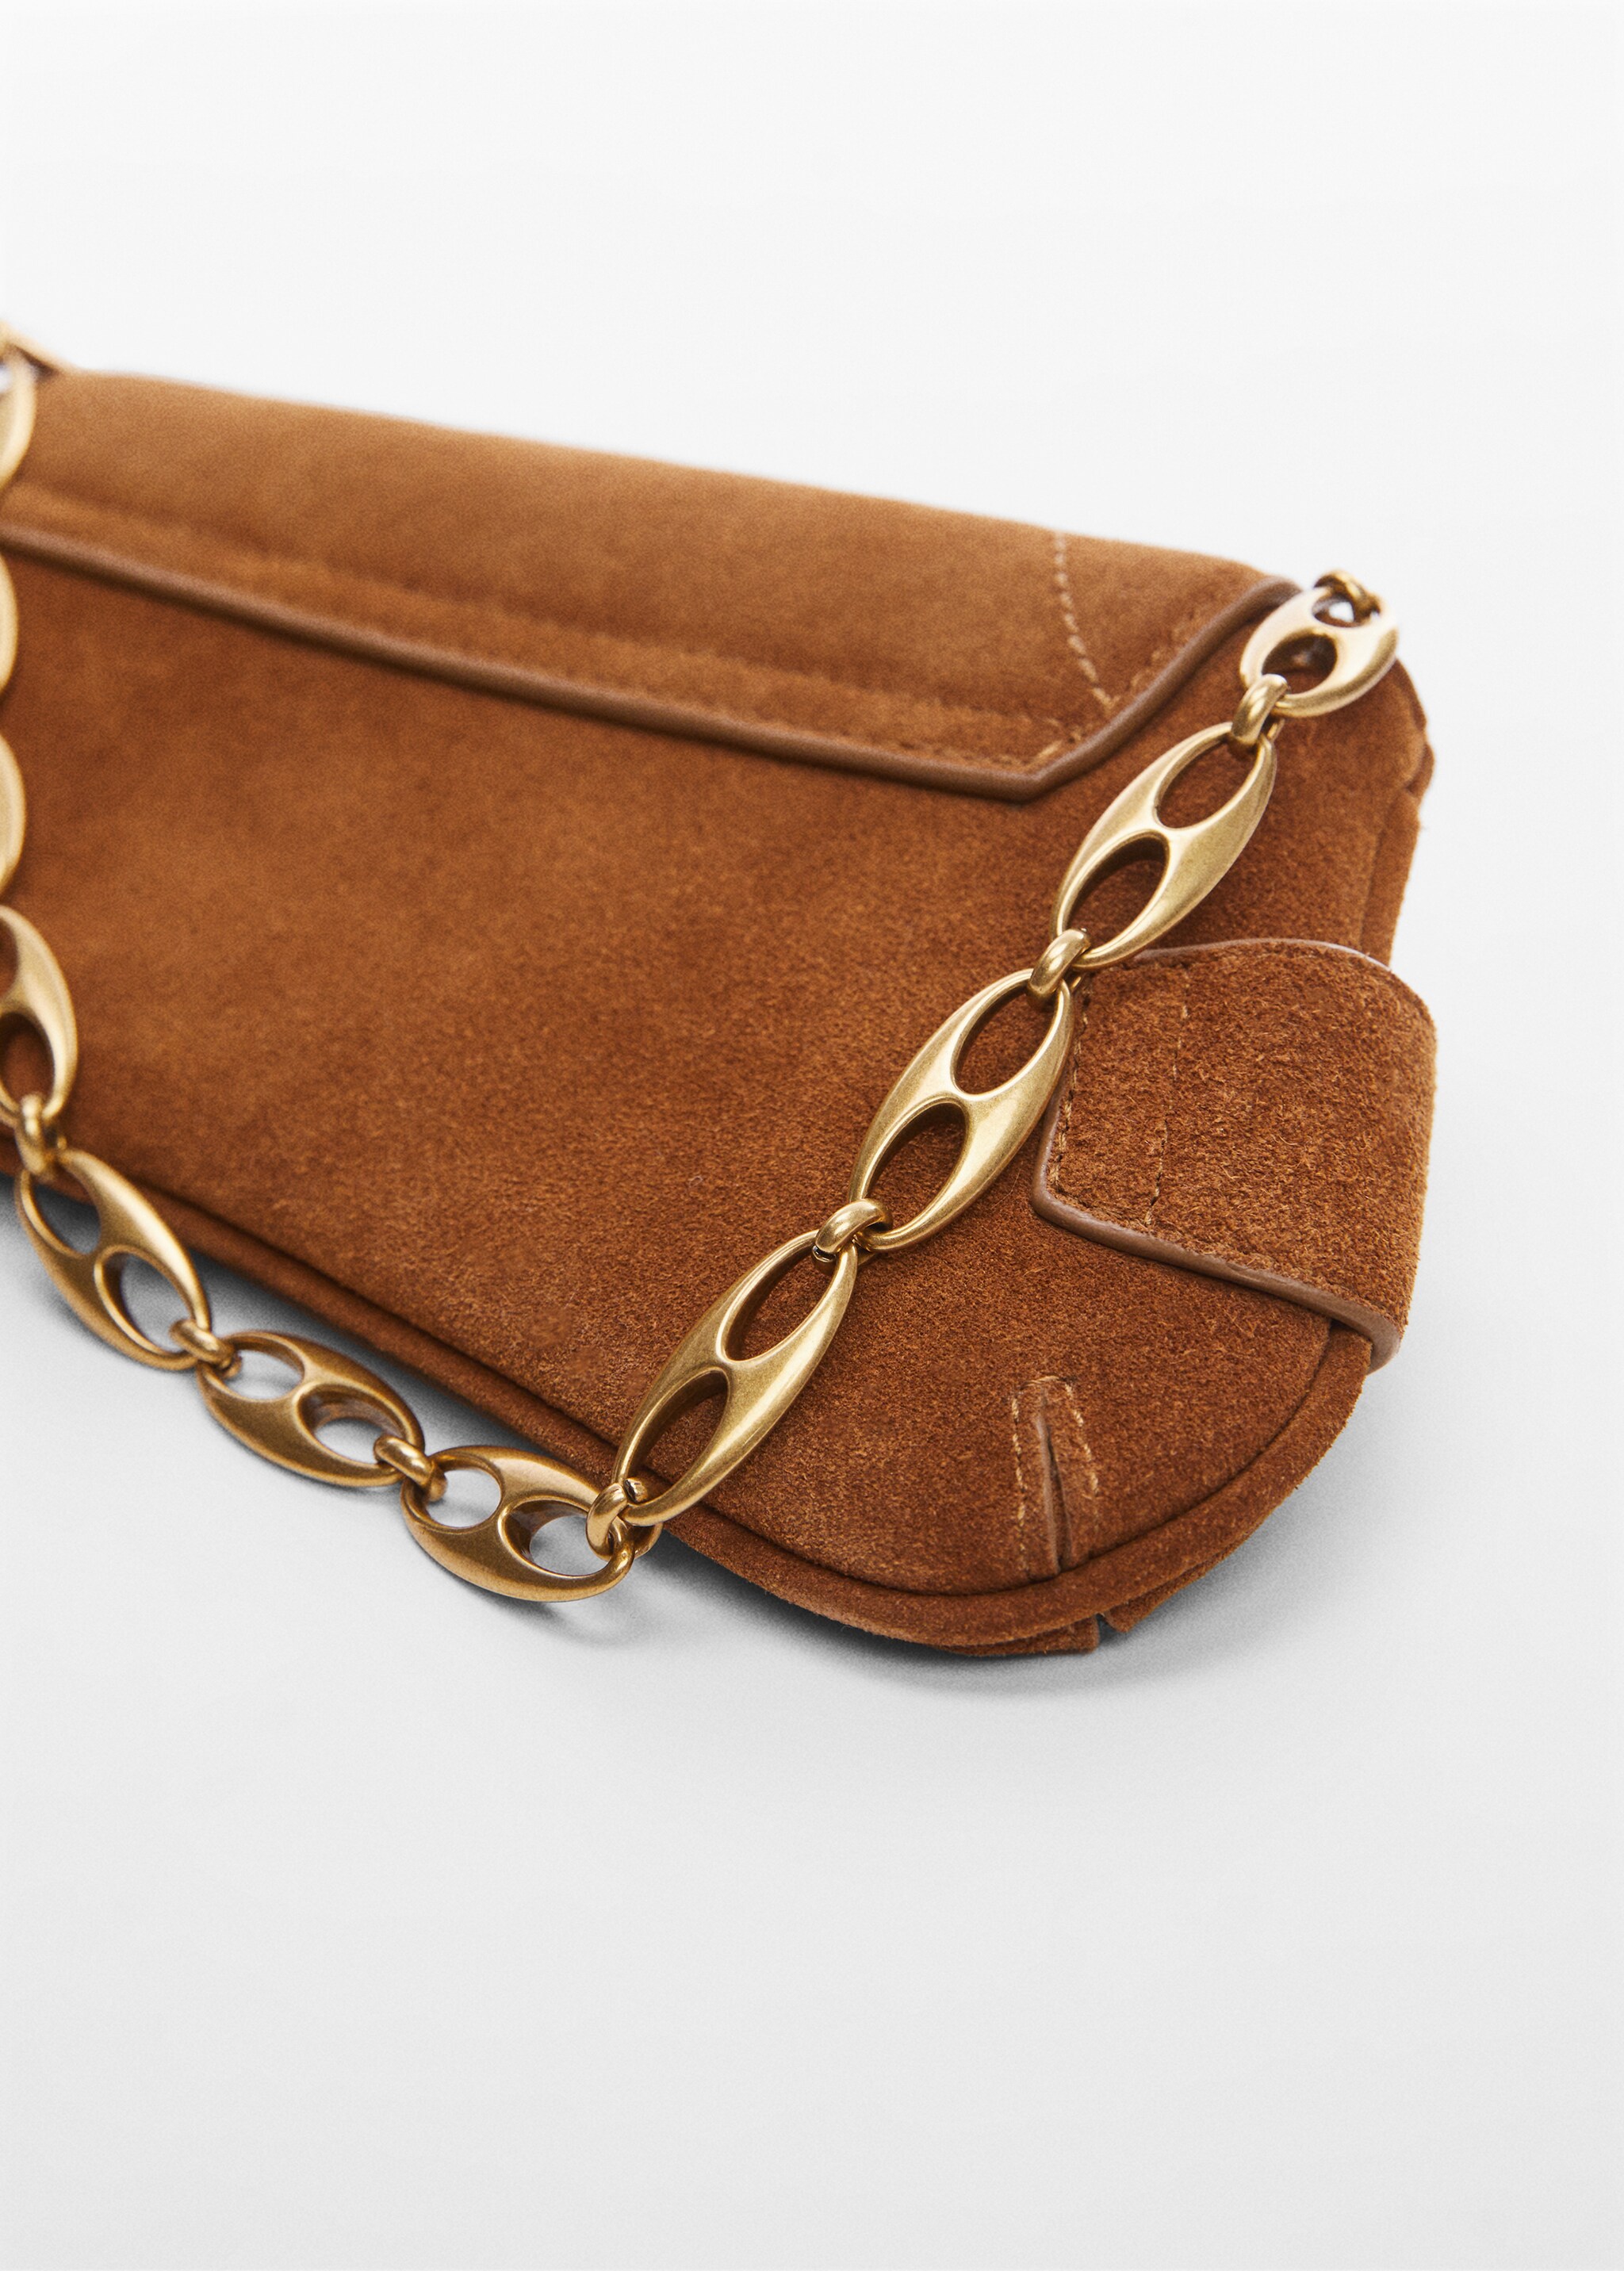 Leather bag with metal handle  - Details of the article 2